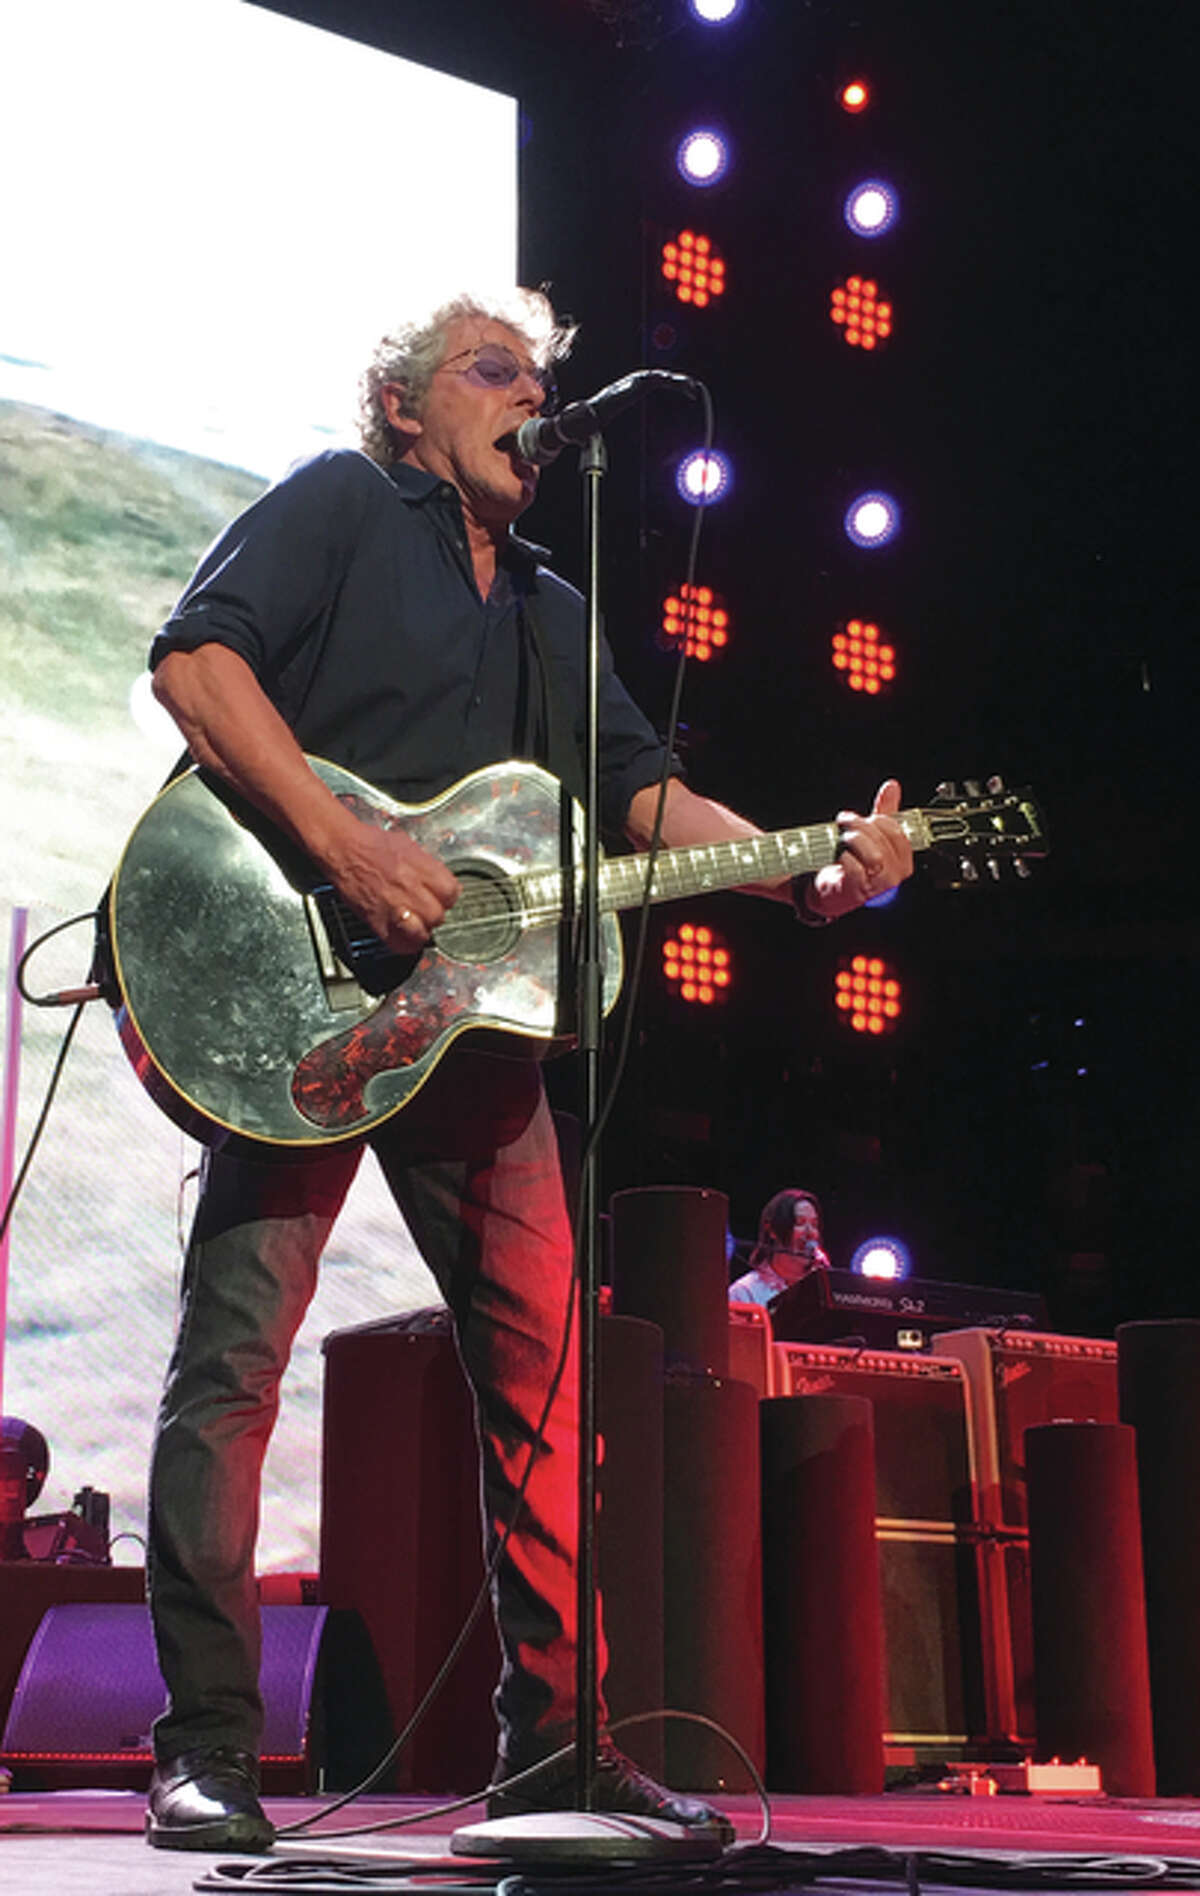 The Who opened its St. Louis show with “Who Are You” followed by “The Seeker” and "The Kids are Alright" Saturday night for The Who Hits 50! North American Tour’s rescheduled date at Scottrade Center. Lead singer Roger Daltrey, pictured, previously had vocal cord issues that caused postponement of two previous St. Louis dates. There were no signs of trouble Saturday night as Daltrey gave an outstanding performance and still hit the thrilling high notes on “Love Reign O’er Me” and “Won’t Get Fooled Again.” Jill Moon | The Telegraph